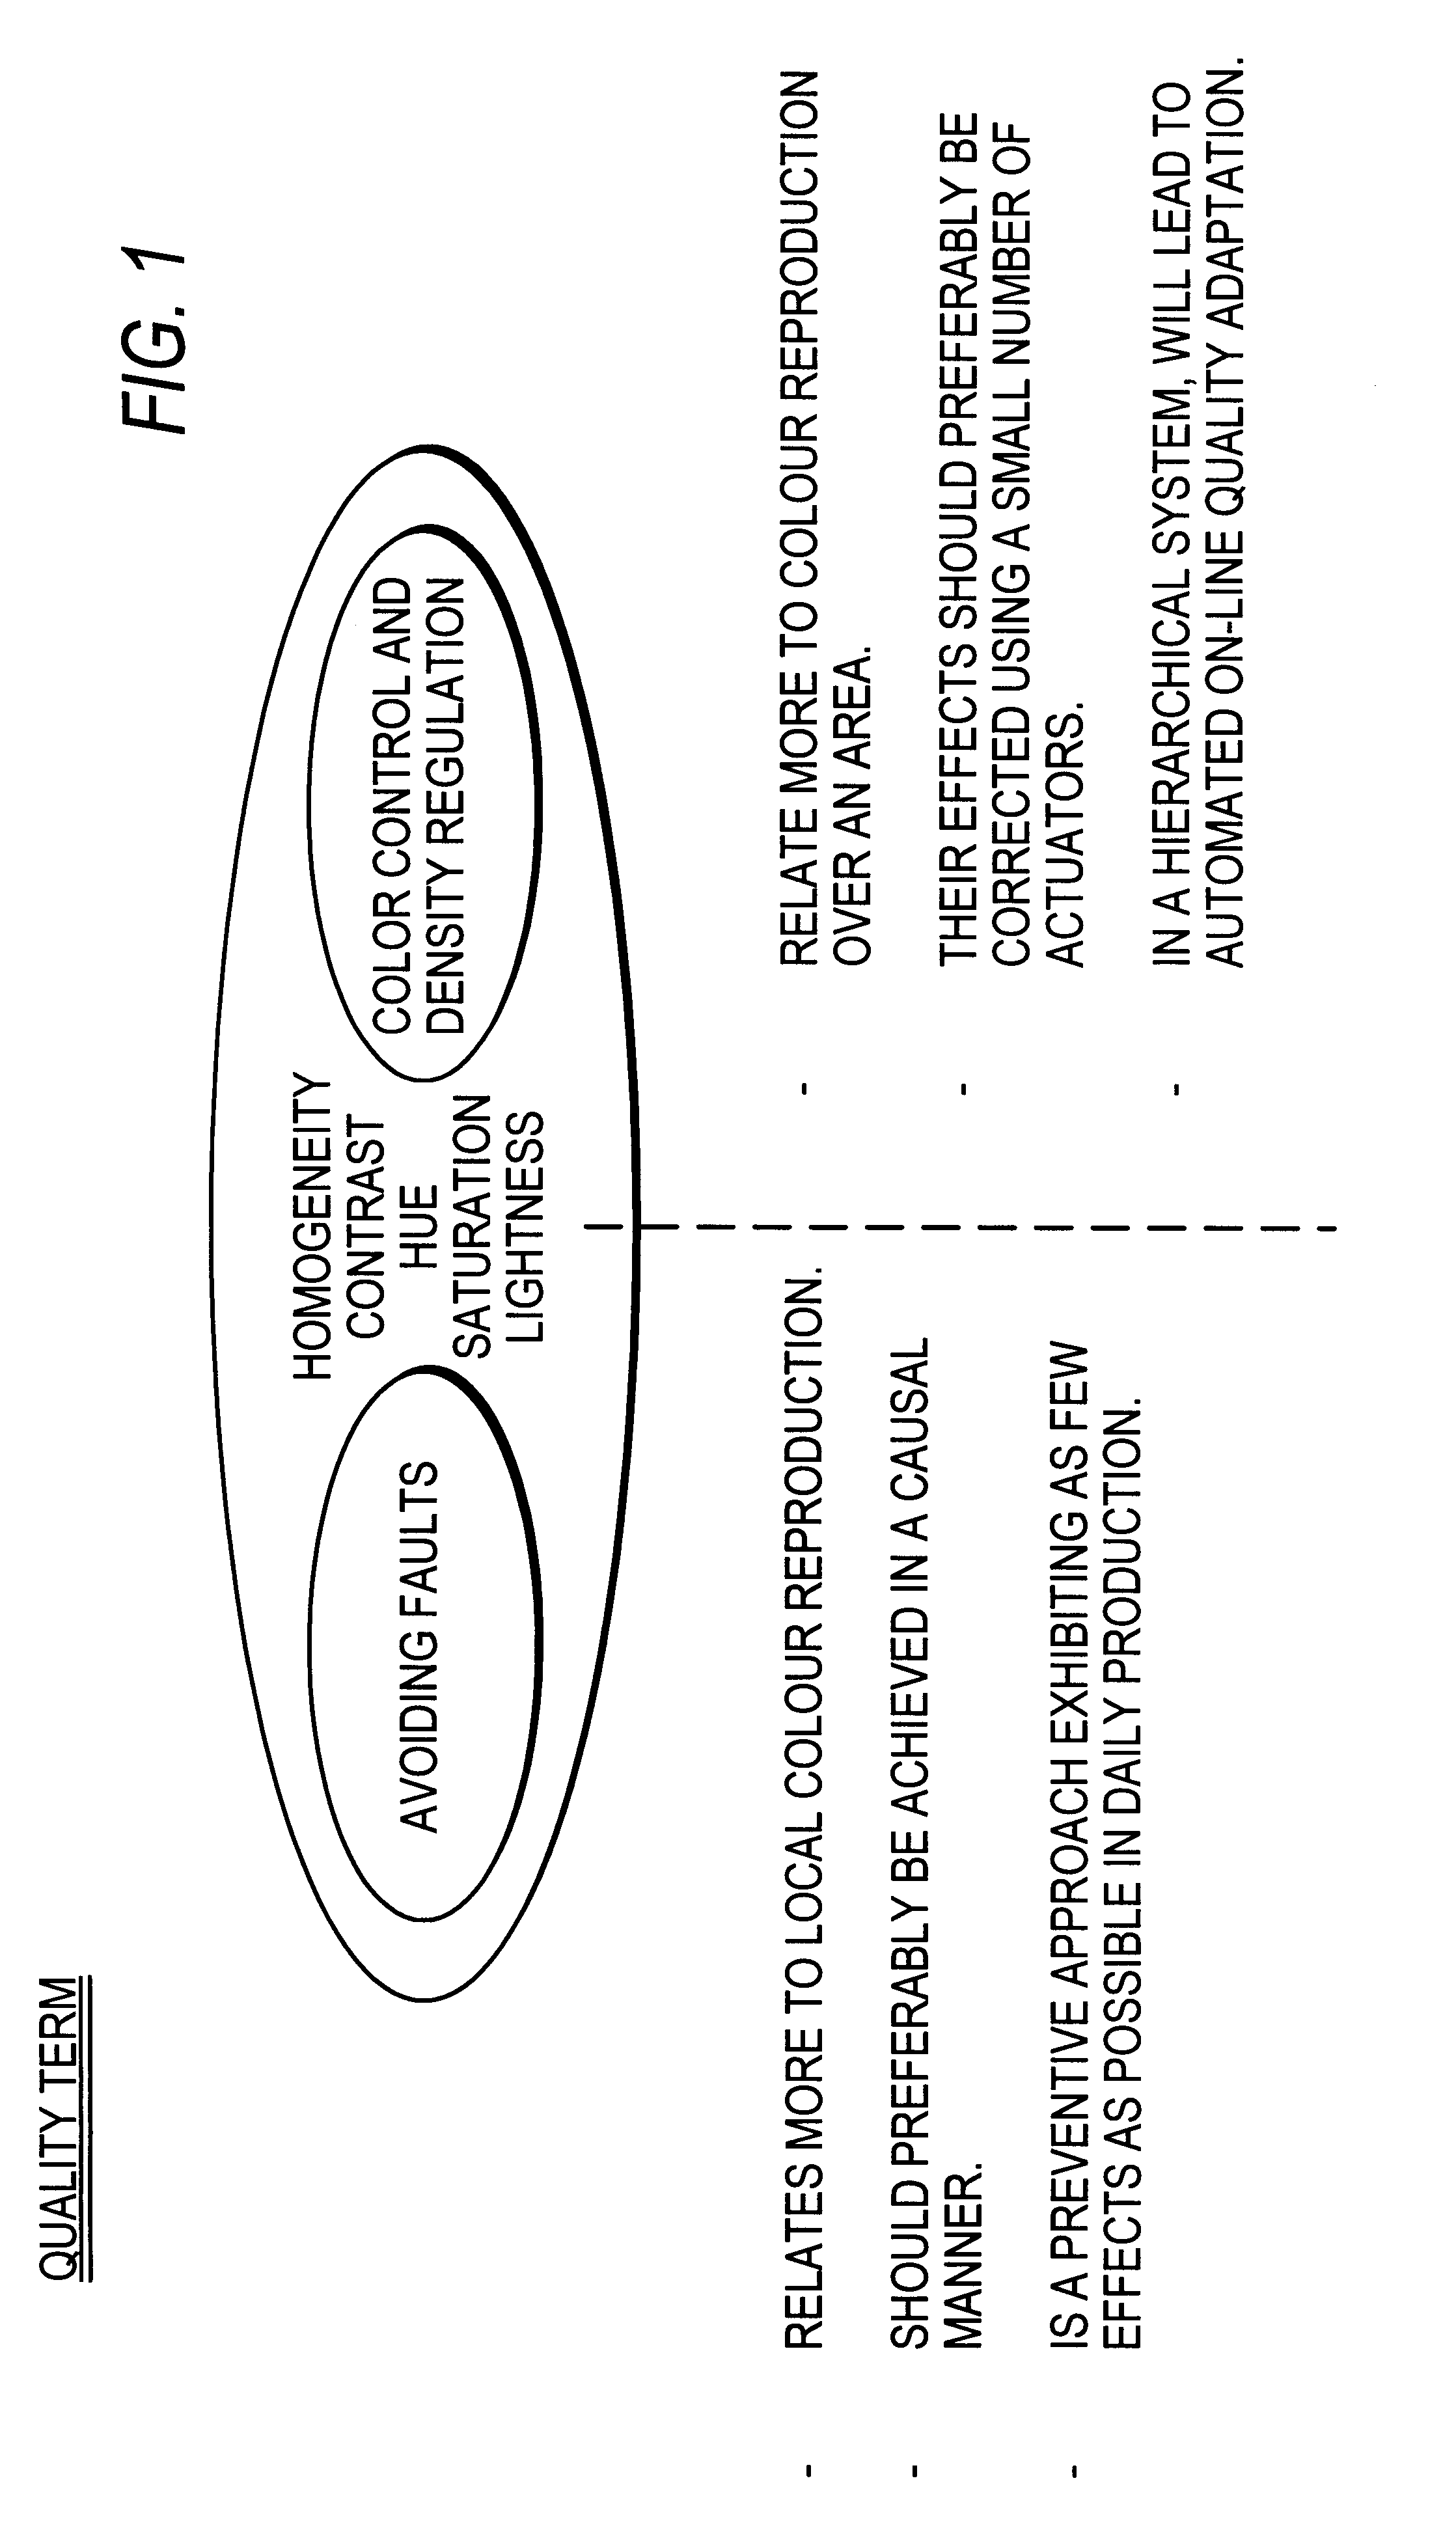 Image data-oriented printing machine and method of operating the same